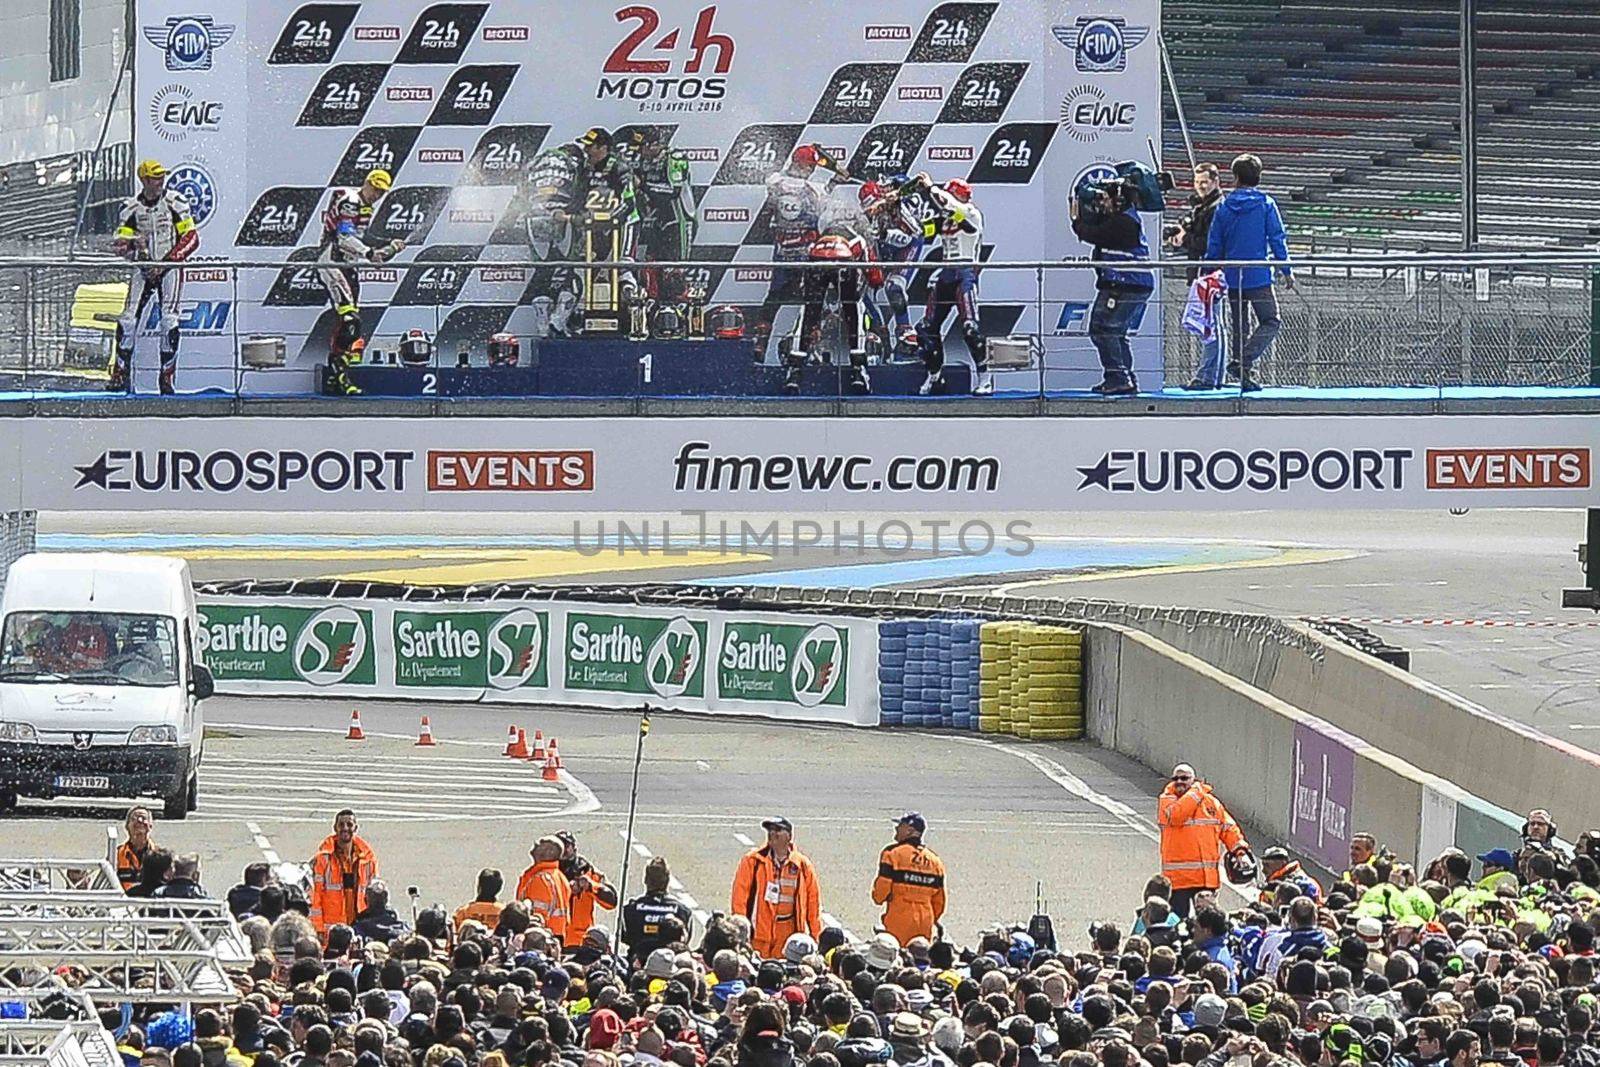 FRANCE, Le Mans: Podium pilots of the 39th edition of Le Mans 24 Hours moto endurance race celebrate over the crowd at Bugatti track in Le Mans, France, on April 9, 2016.